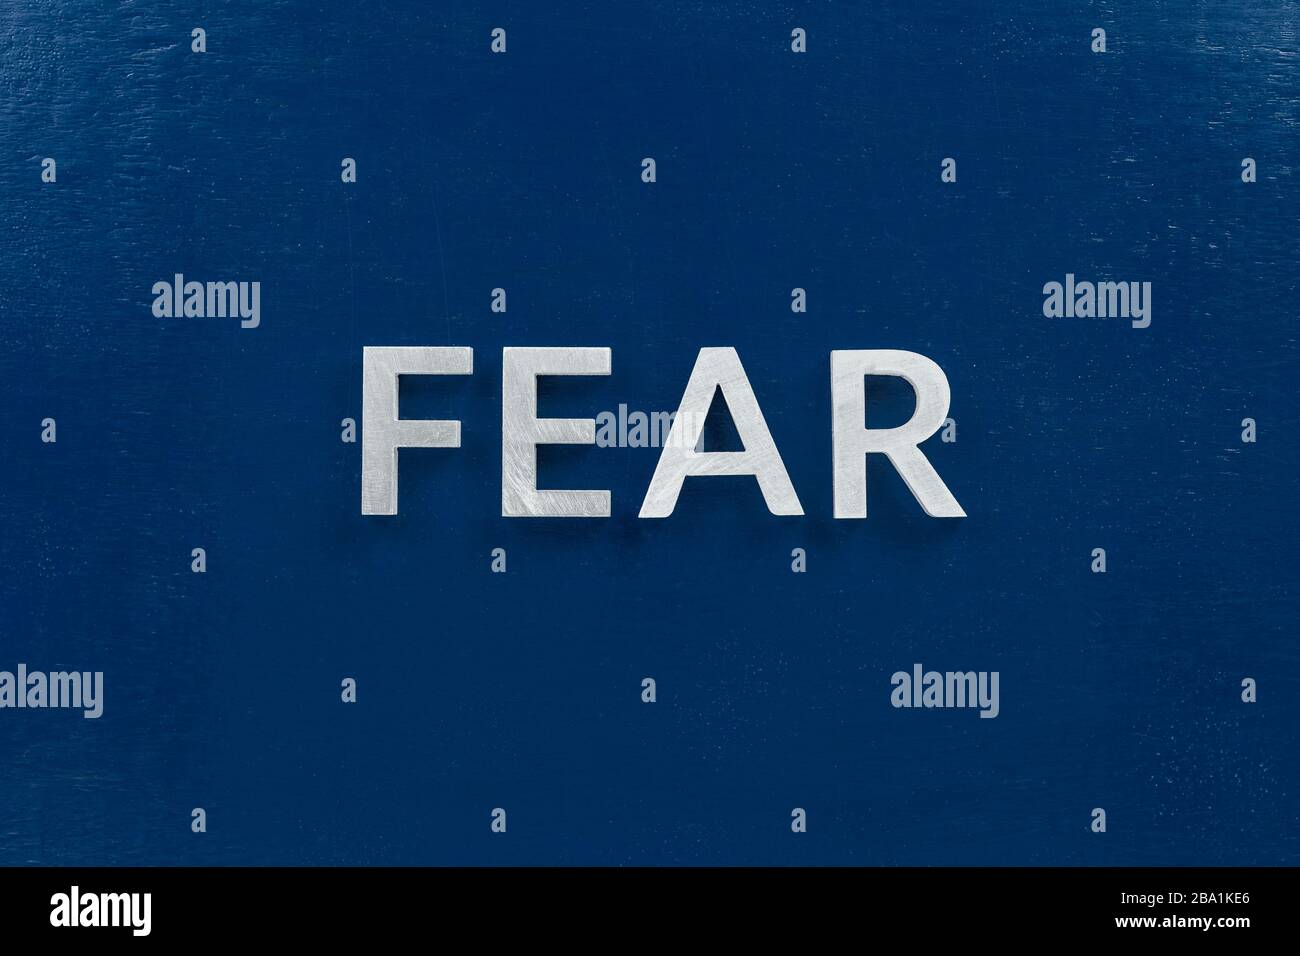 the word fear laid with silver letters on flat blue surface Stock Photo